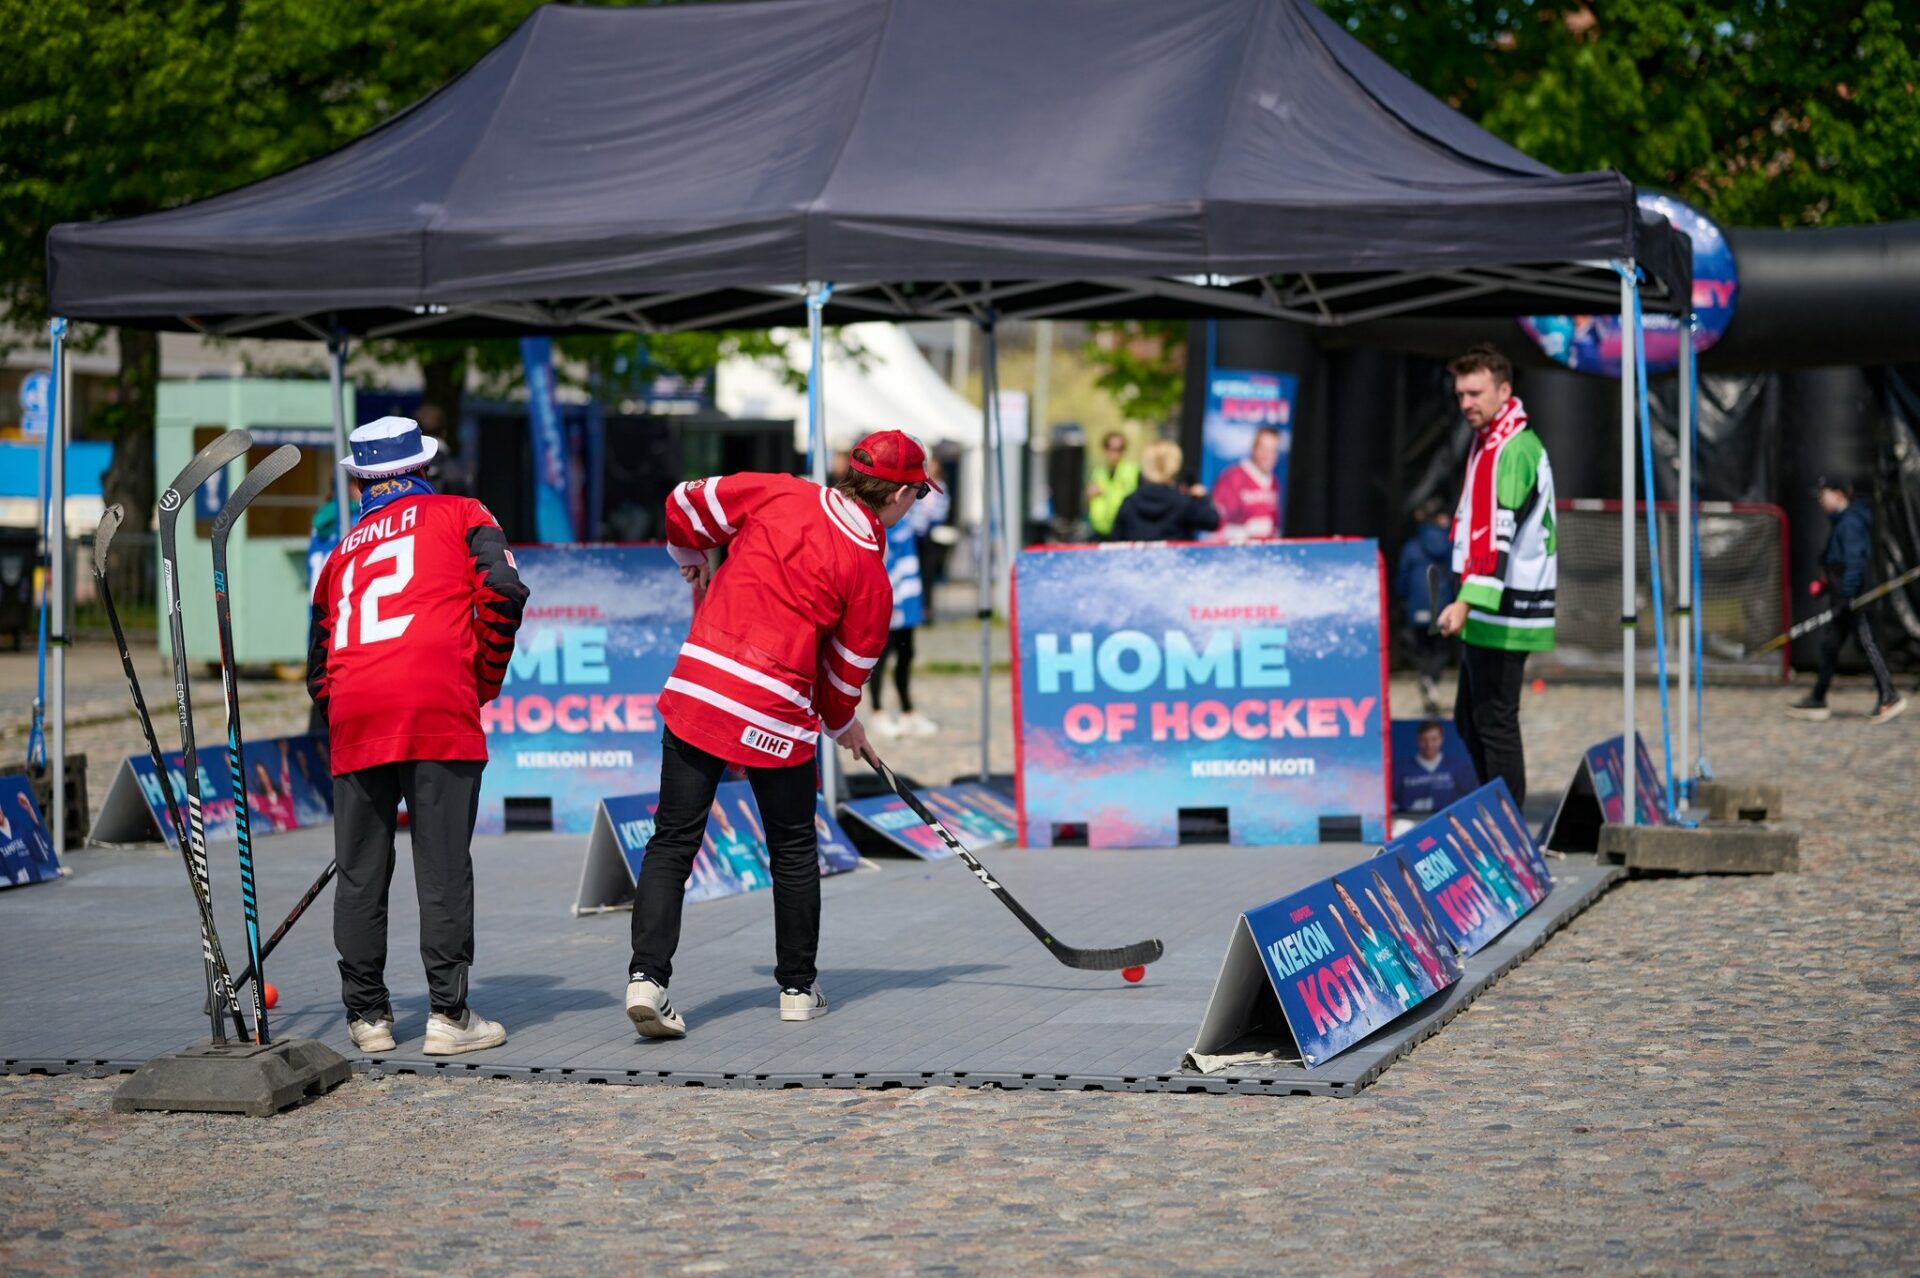 Hockey fans playing at the Home of Hockey zone.